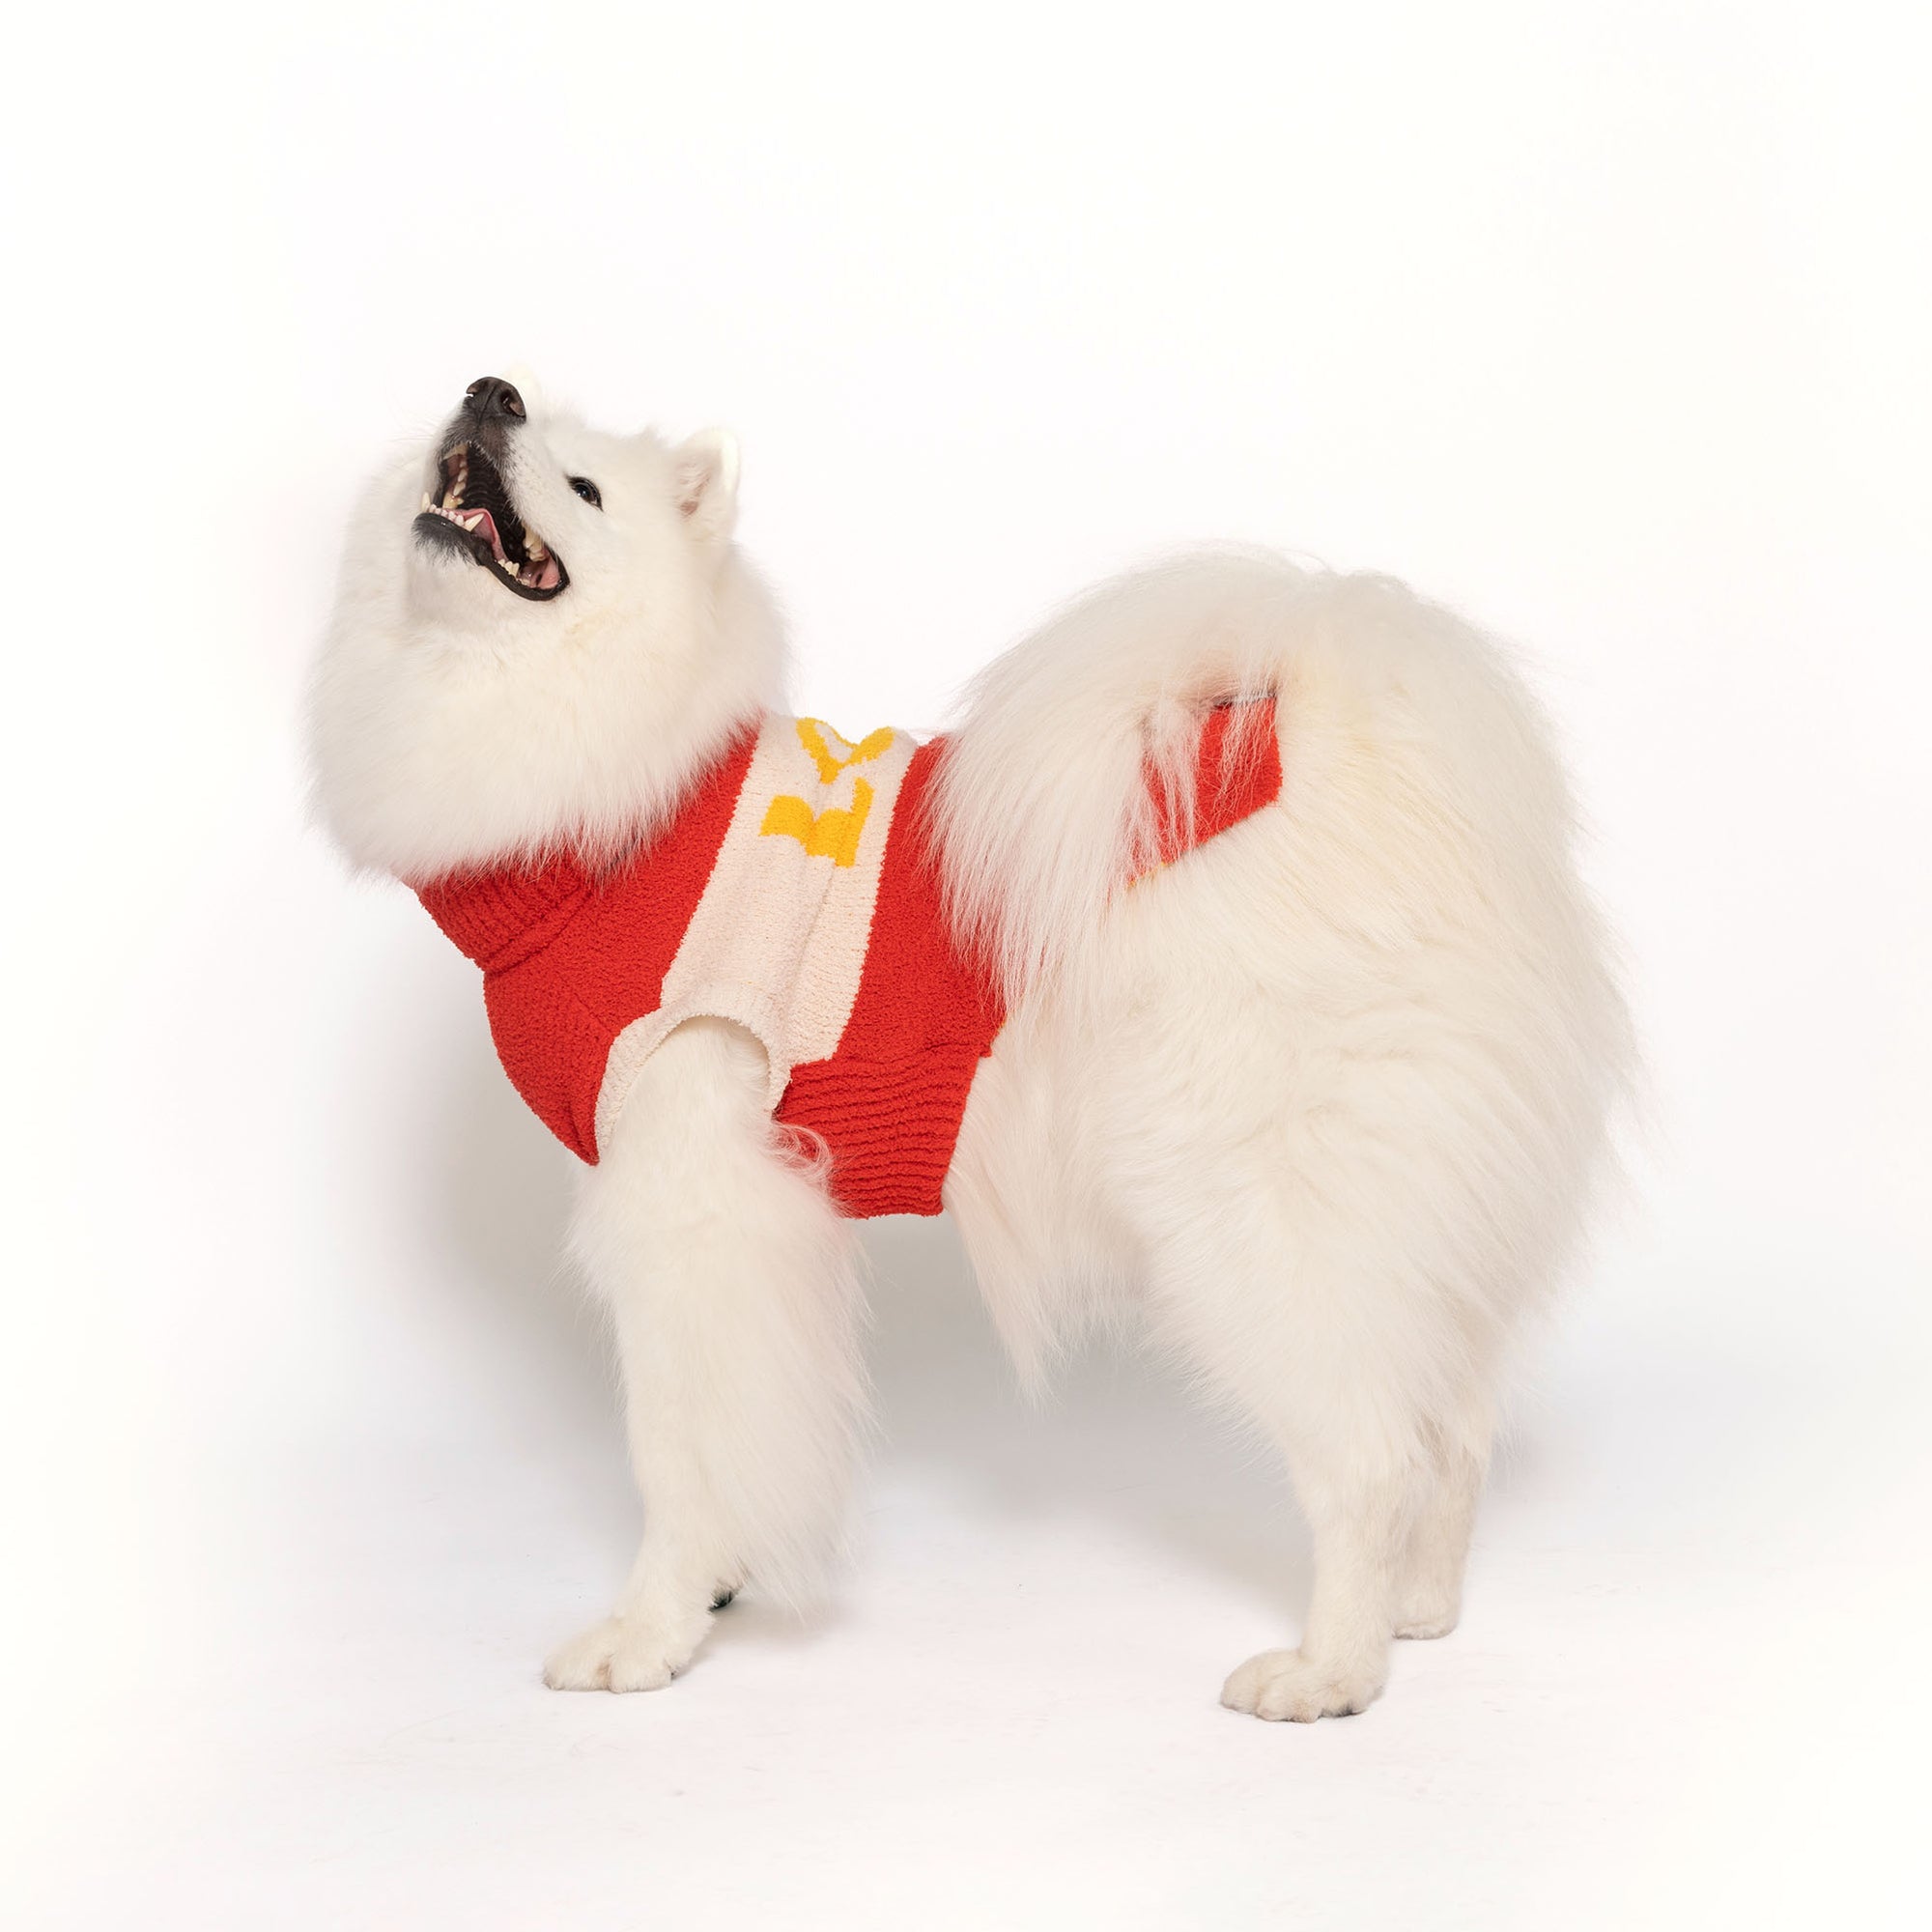  An exuberant Samoyed dressed in The Furryfolks red and white sweater is captured mid-bark, offering a glimpse of its playful personality. The sweater's bold red hue highlights the dog's snowy white coat, complementing its spirited expression.